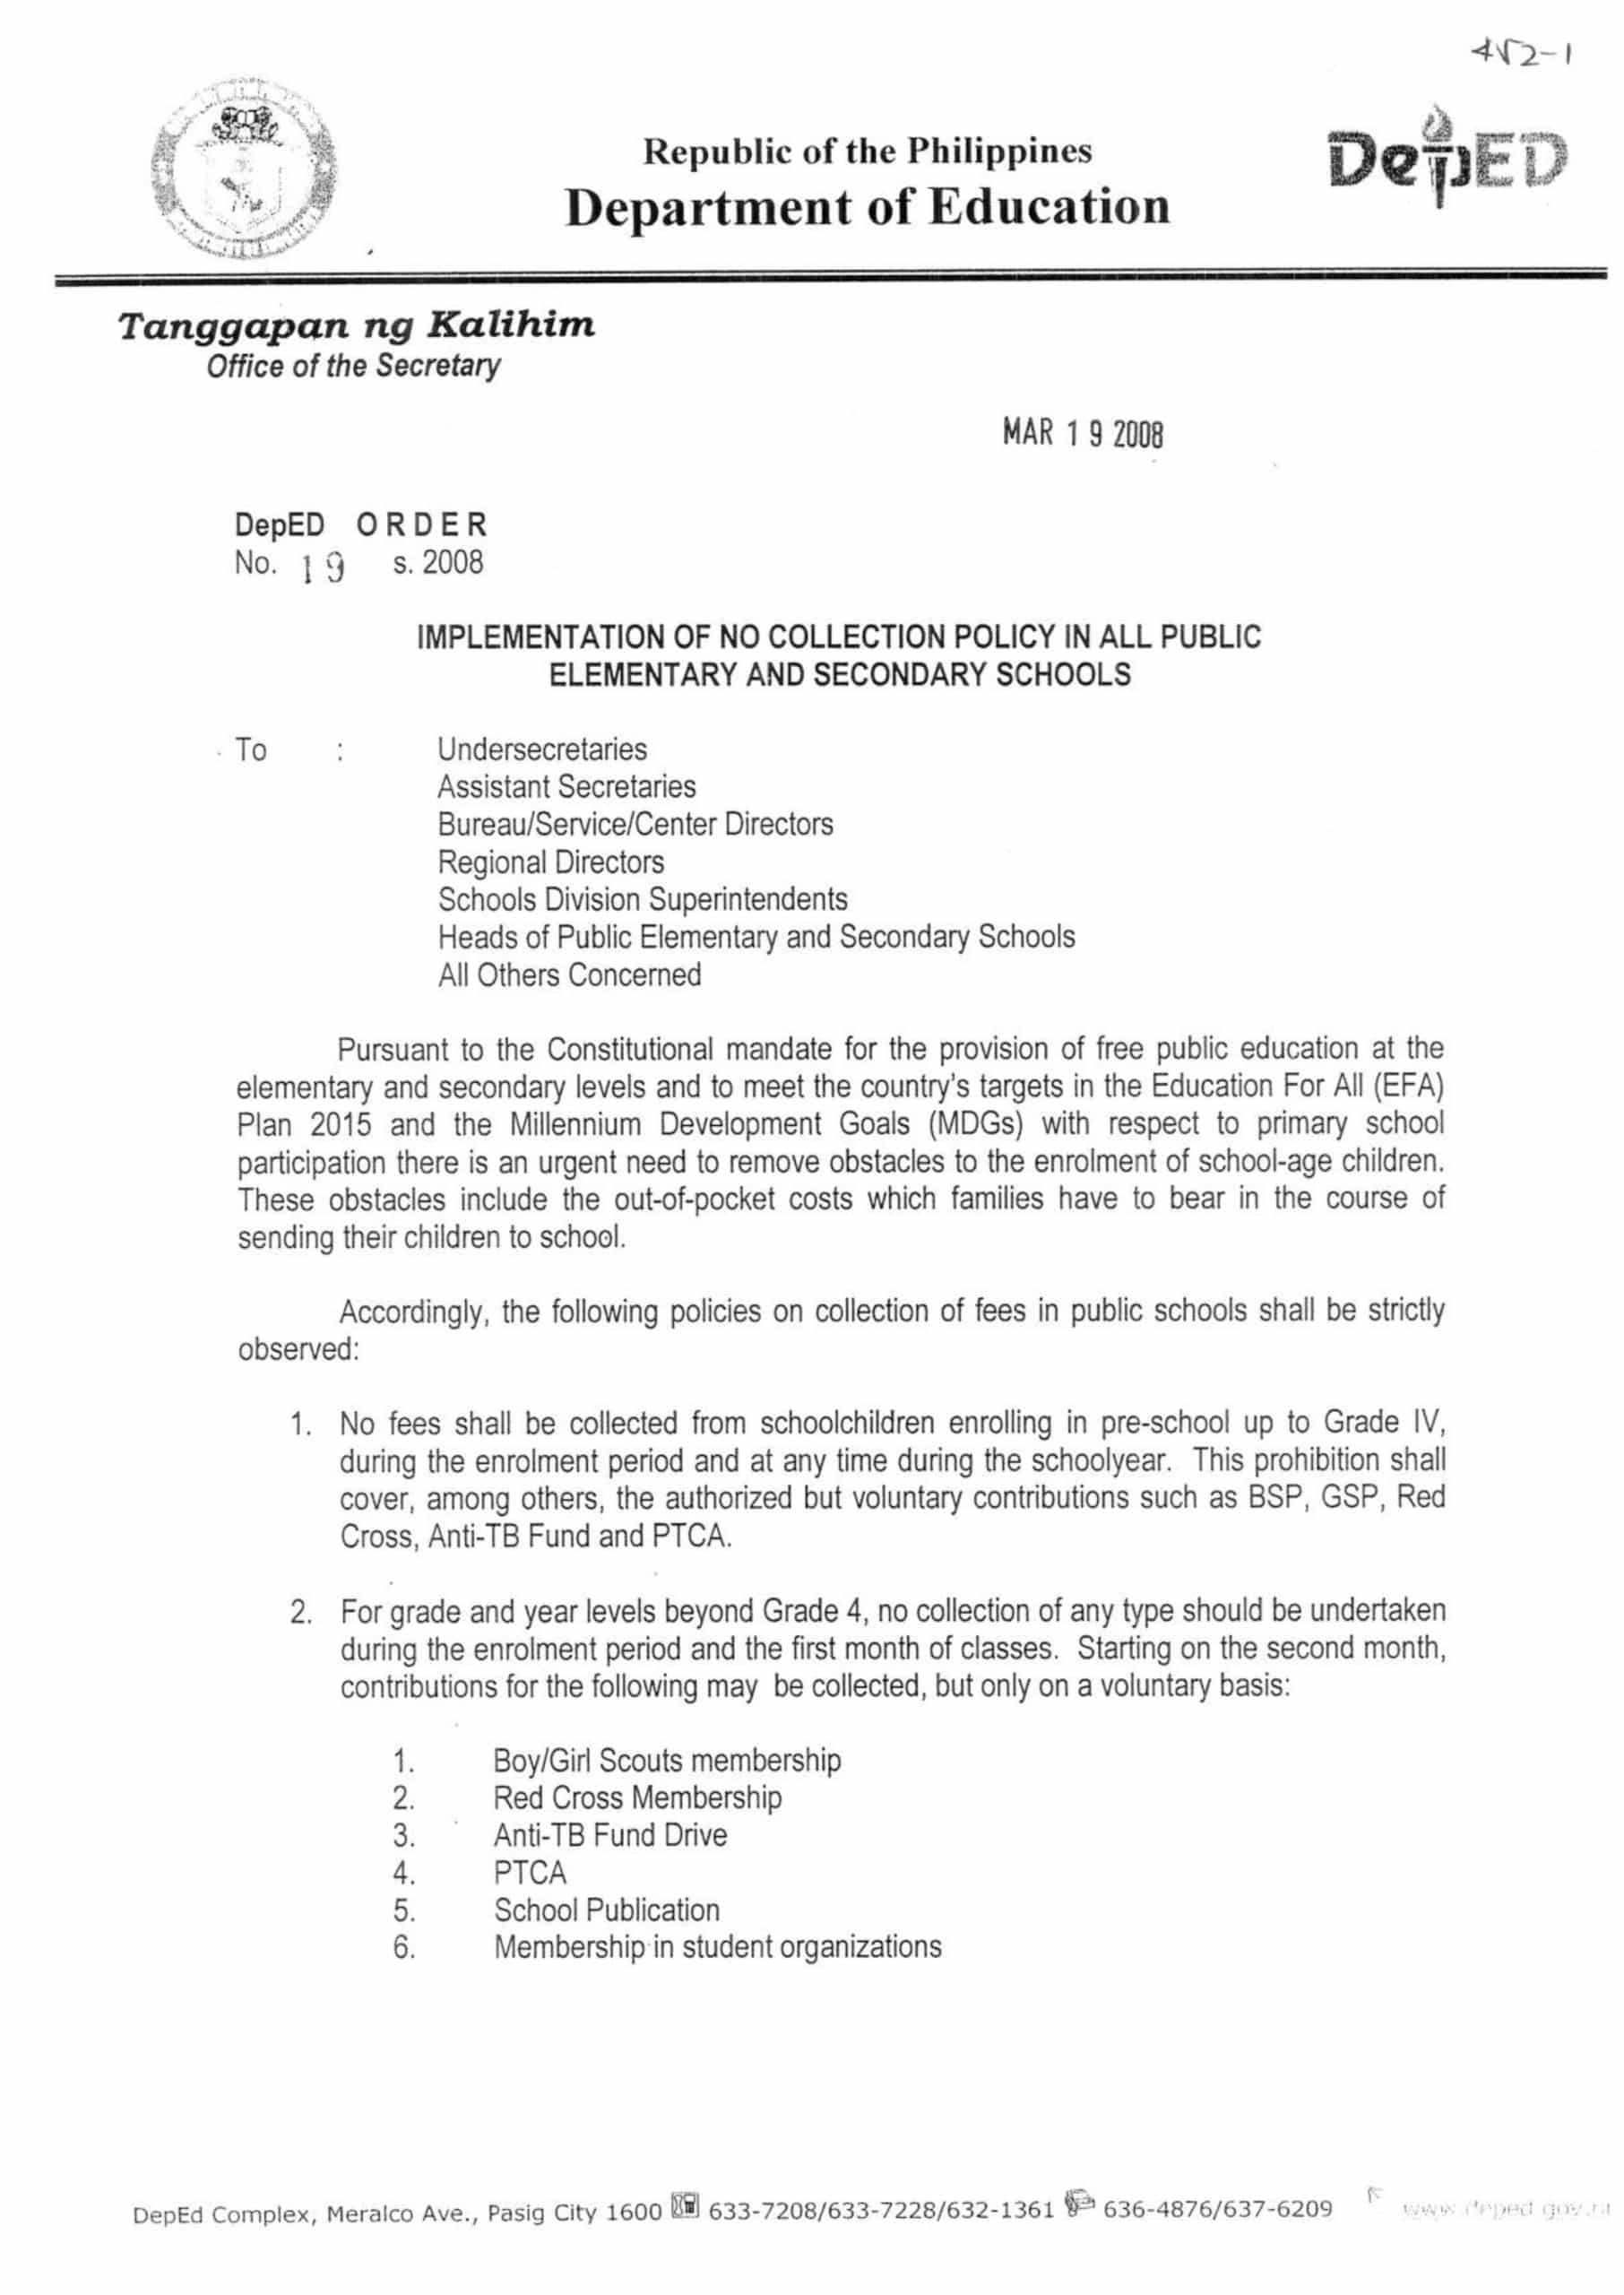 deped order on no assignment policy